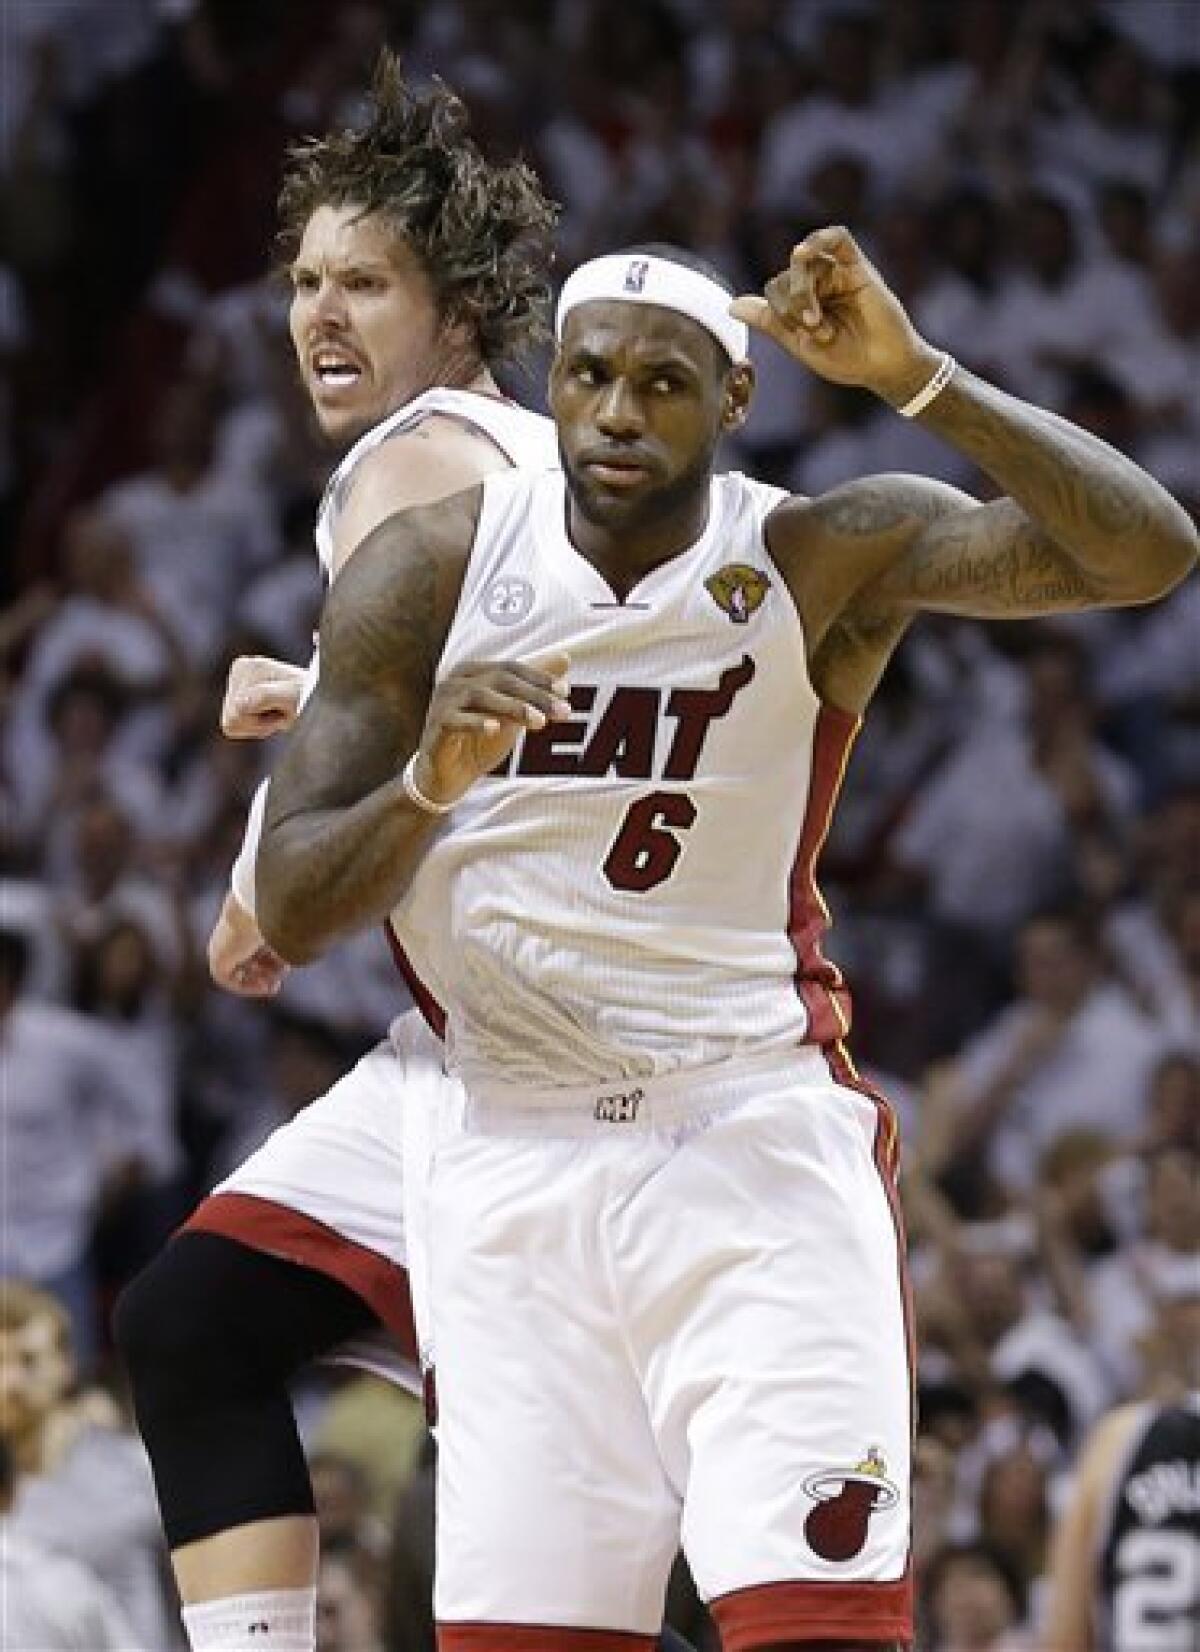 LeBron James on Heat: We're playing like s--- on defense